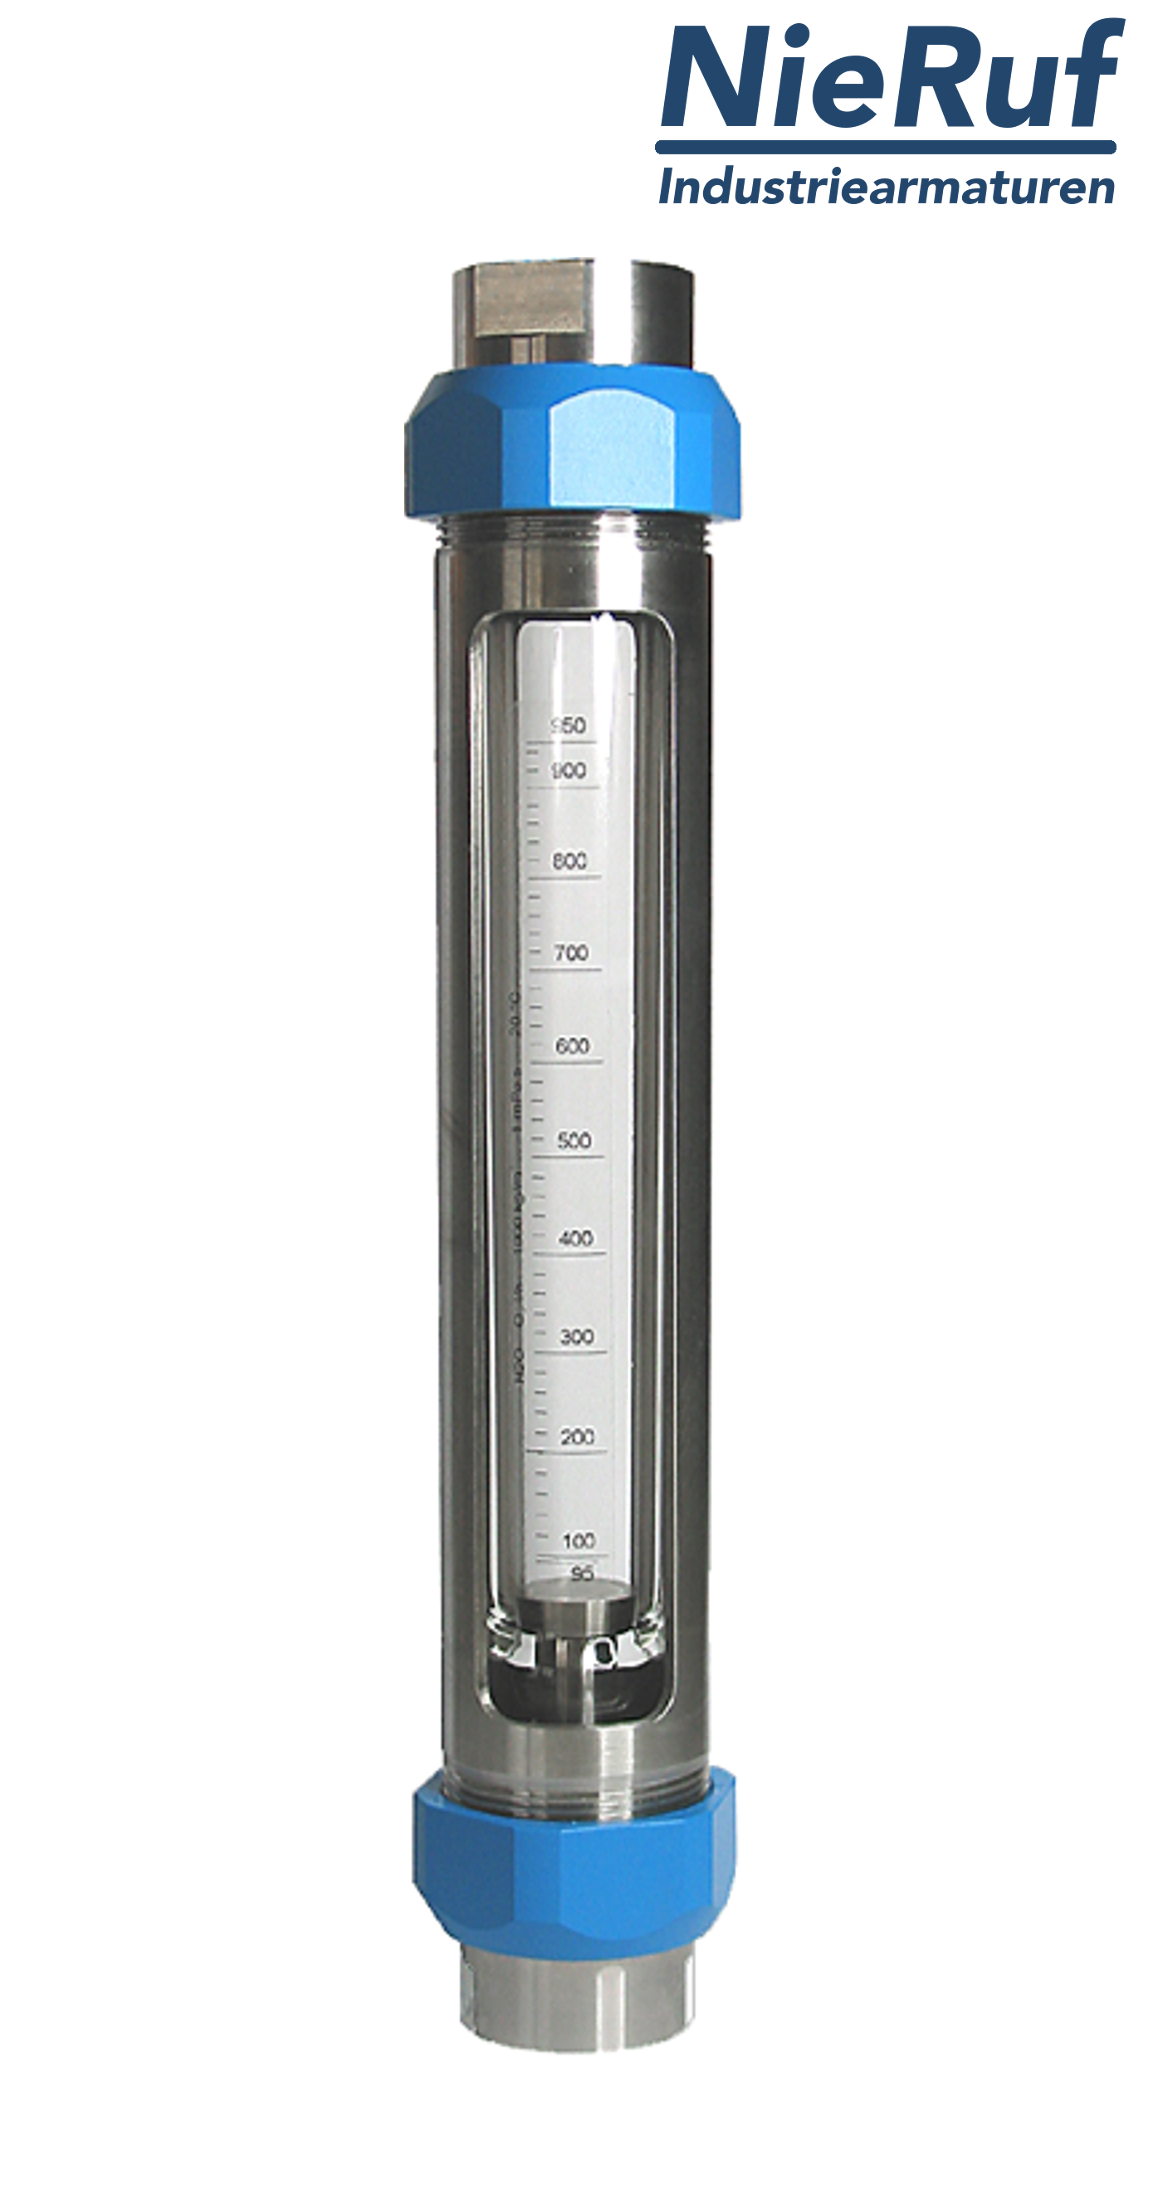 Variable area flowmeter stainless steel + borosilicate 3/4" inch 250.0 - 2500 l/h water FKM